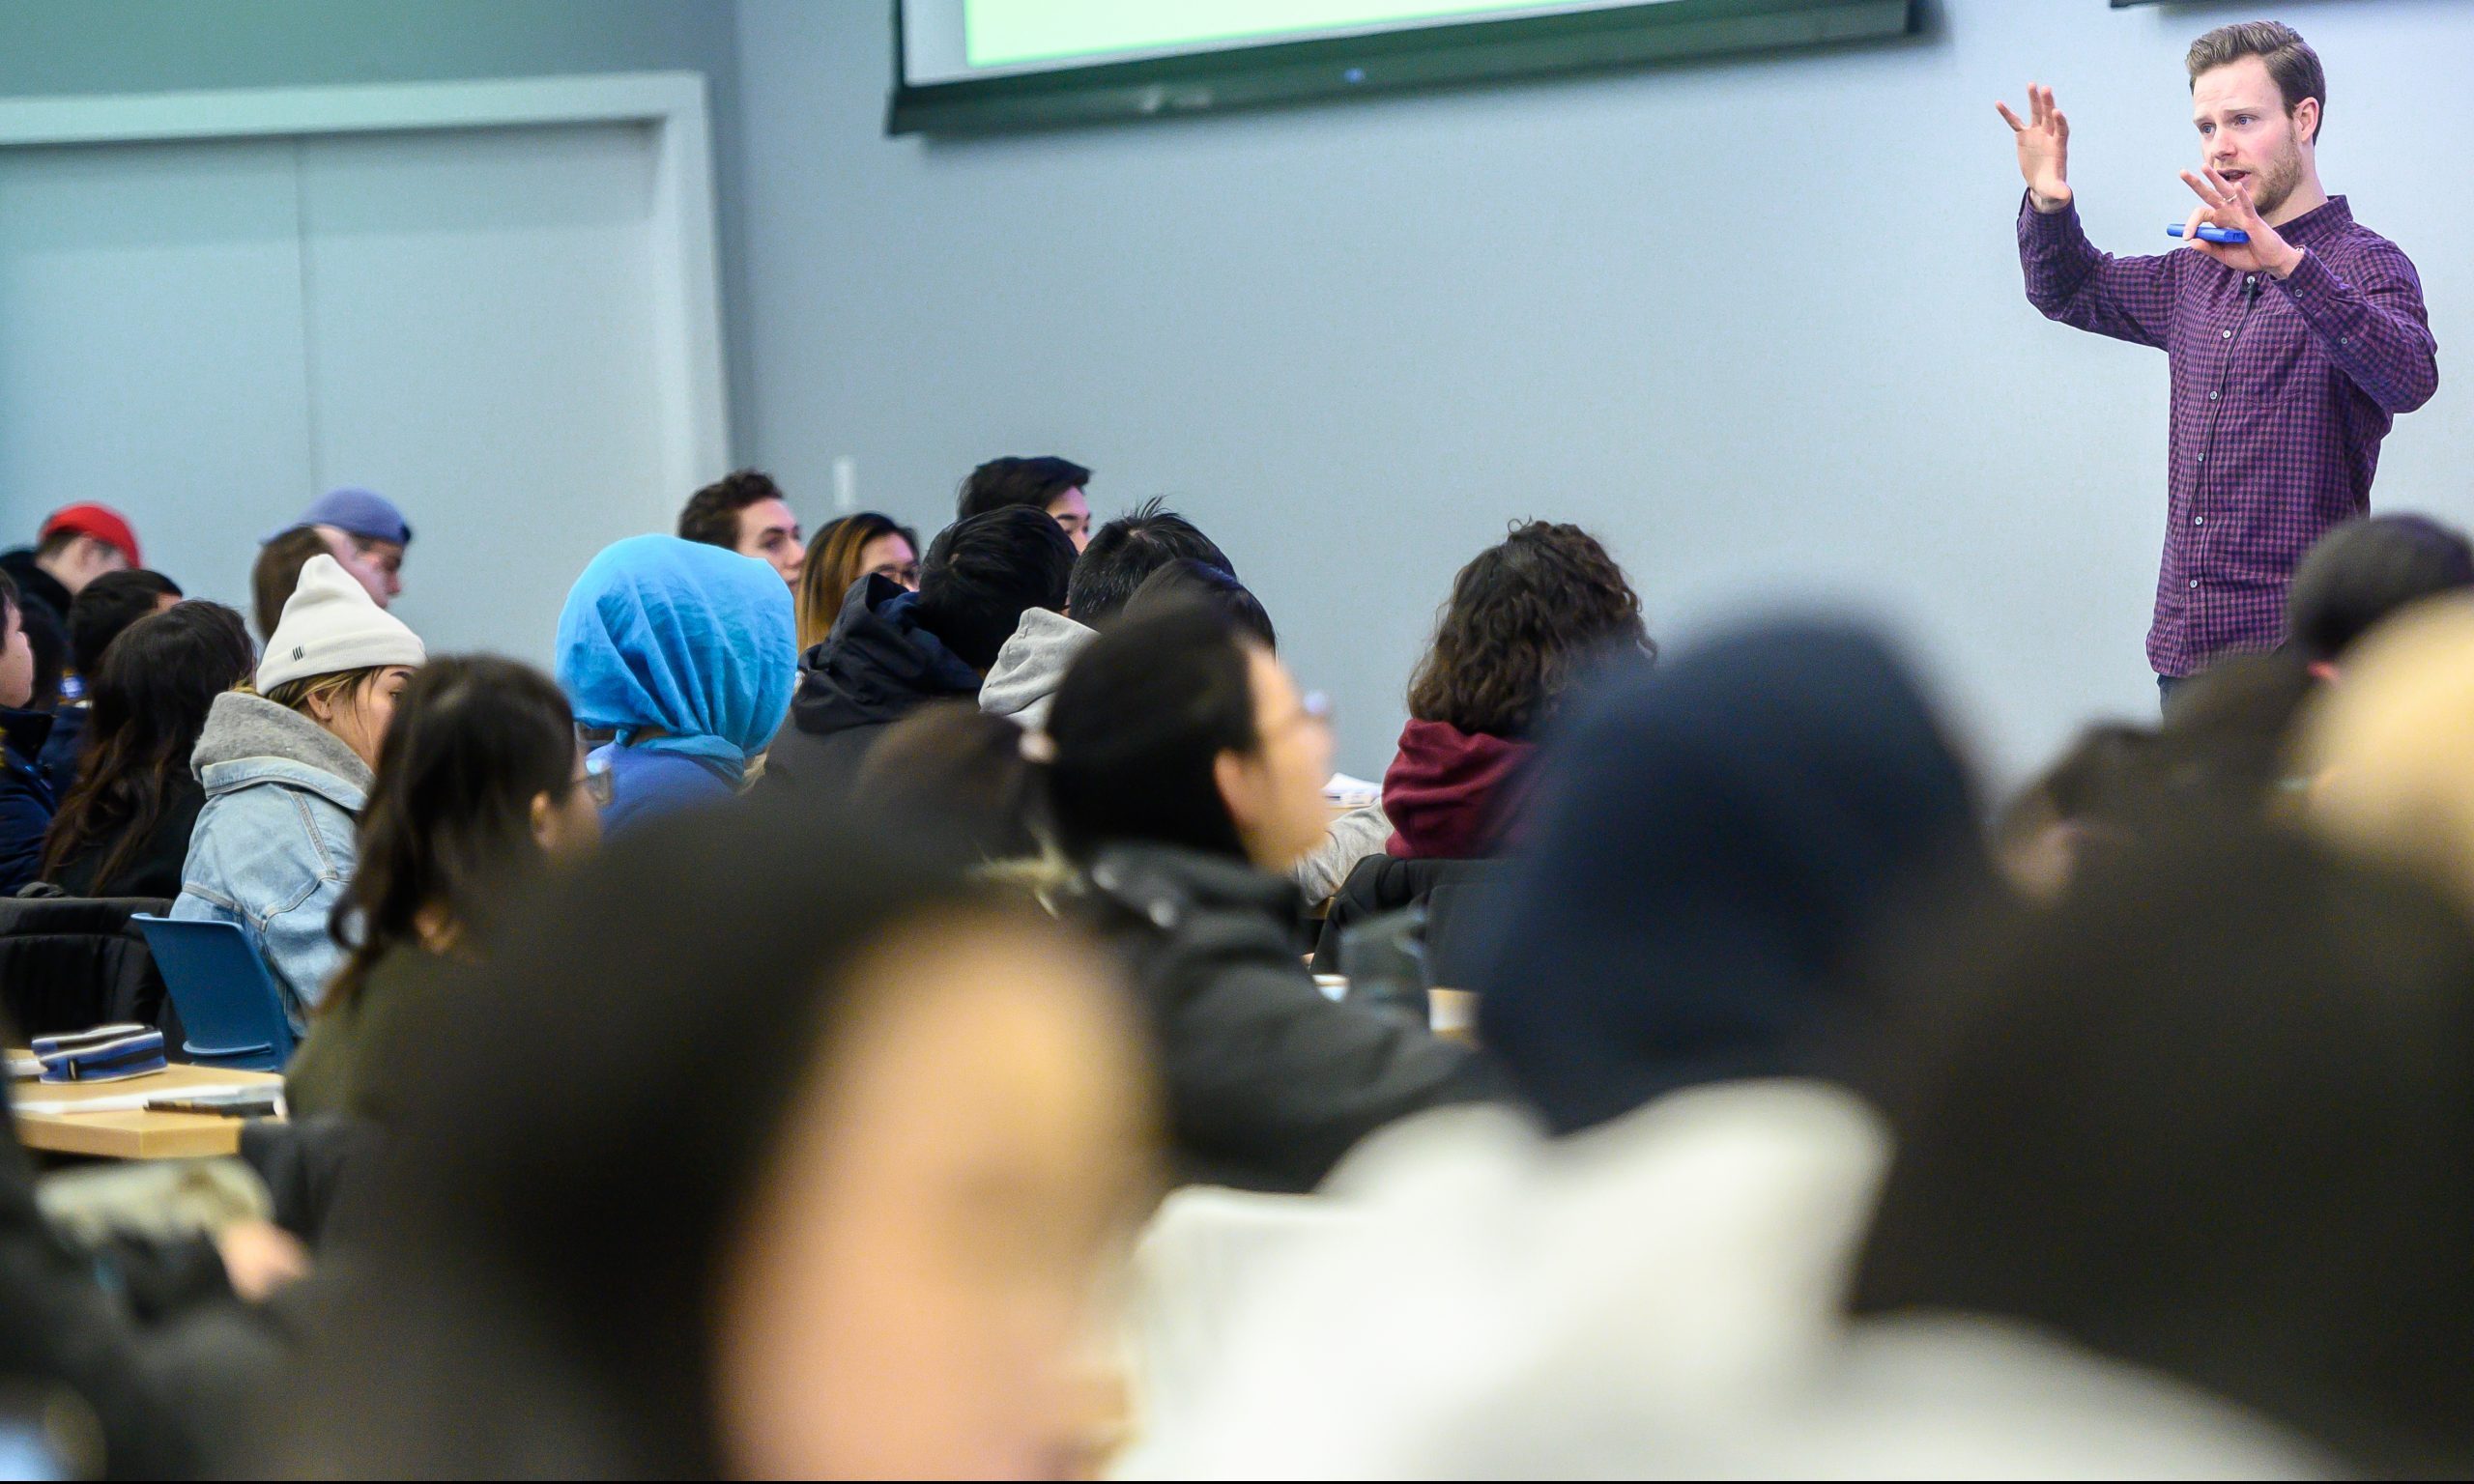 The cover image of the project depicts a UBC professor standing at the front of a room teaching students.